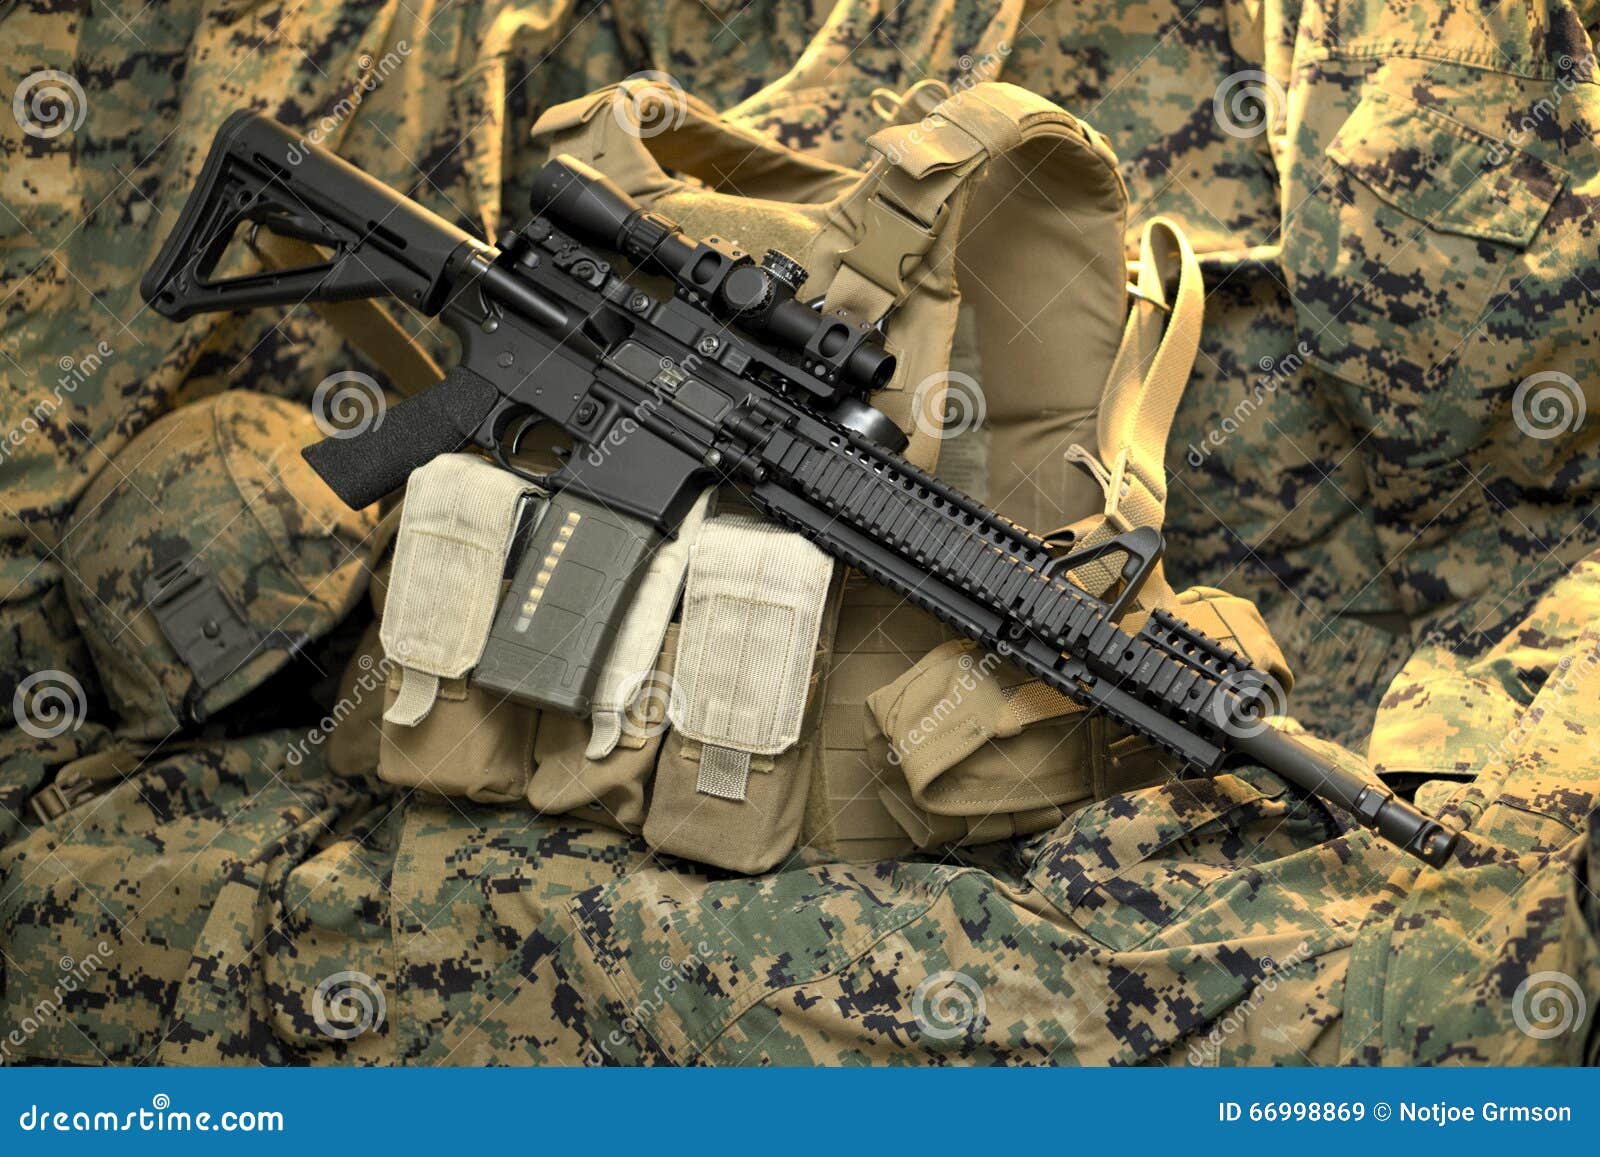 tactical rifle resting on vest